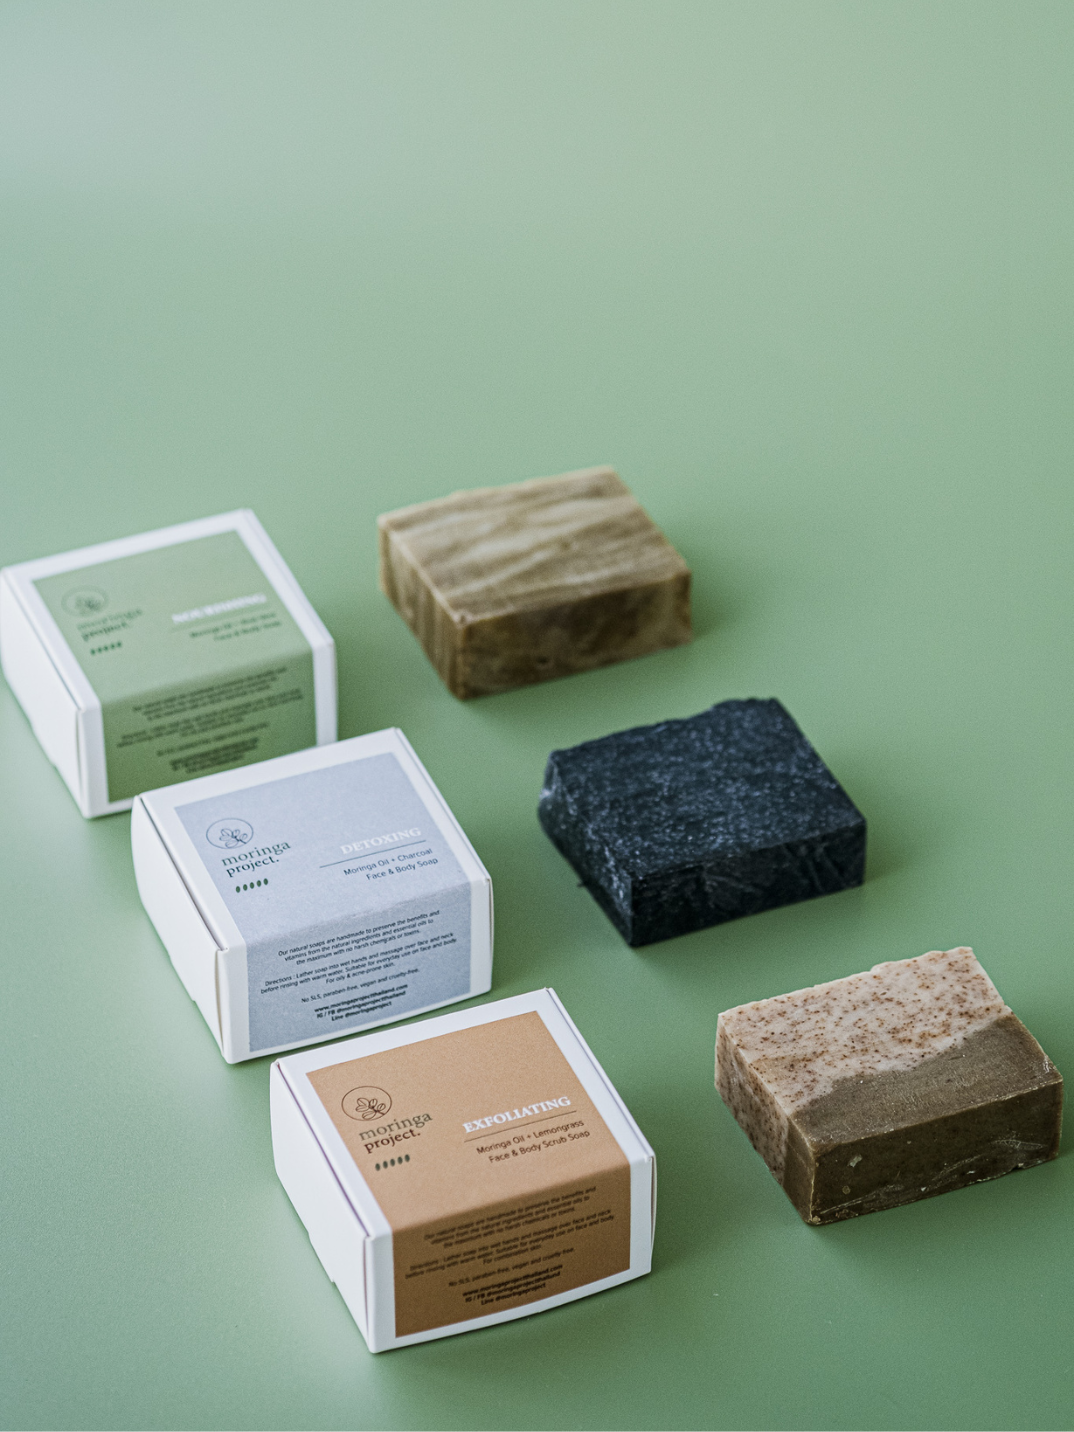 moringa nourishing oil and aloe vera soap for face and body natural ethical skincare shop eco-friendly sustainable brands low waste zero-waste living